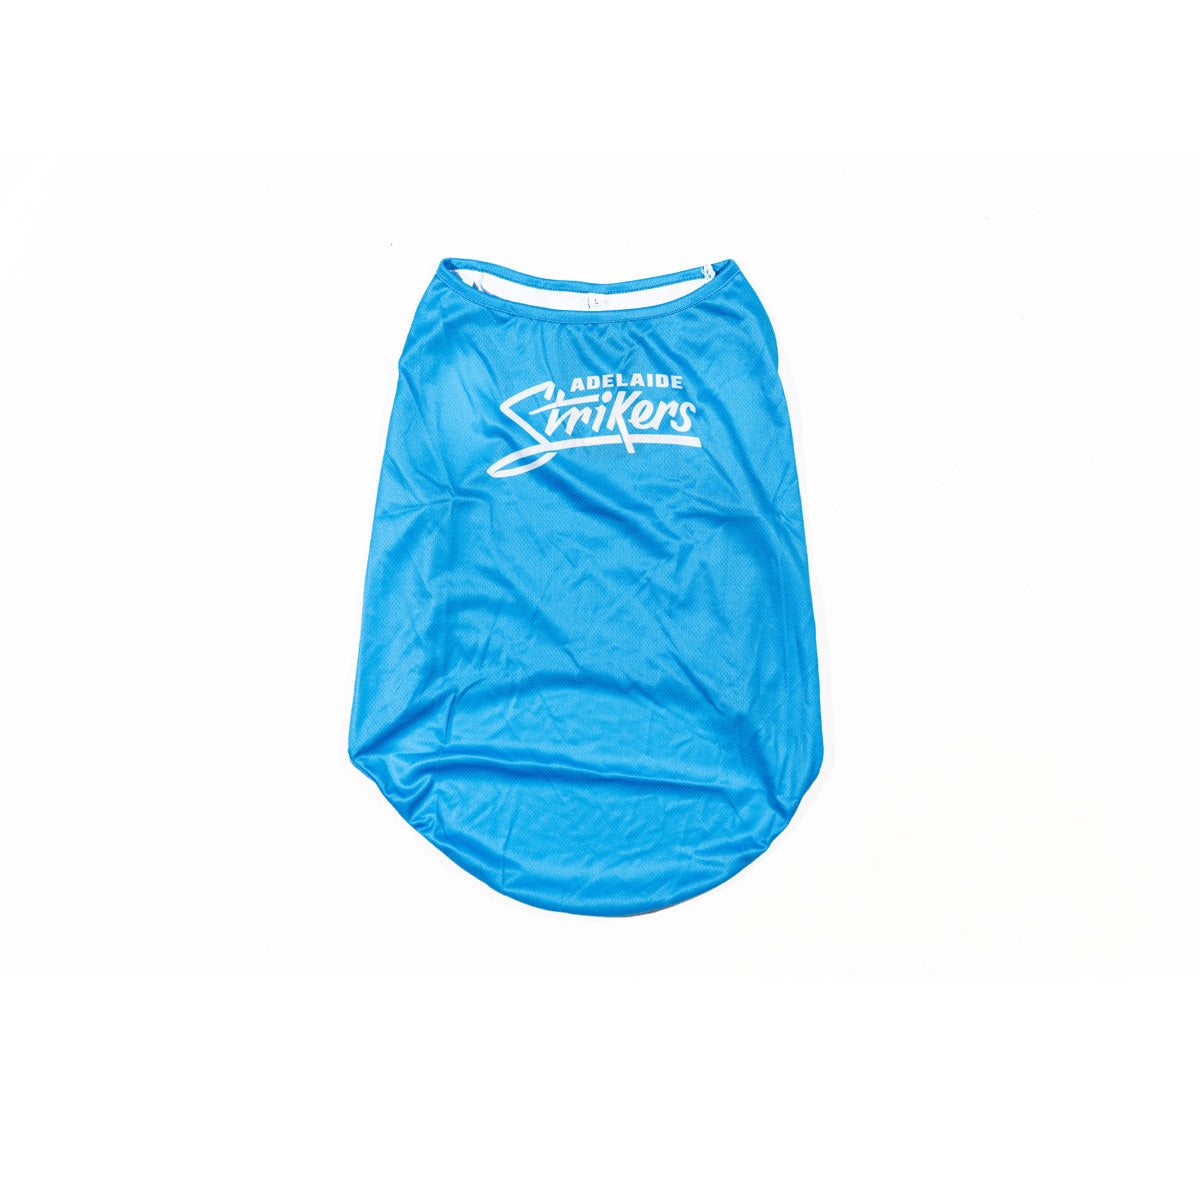 Adelaide Strikers BBL Dog Jersey